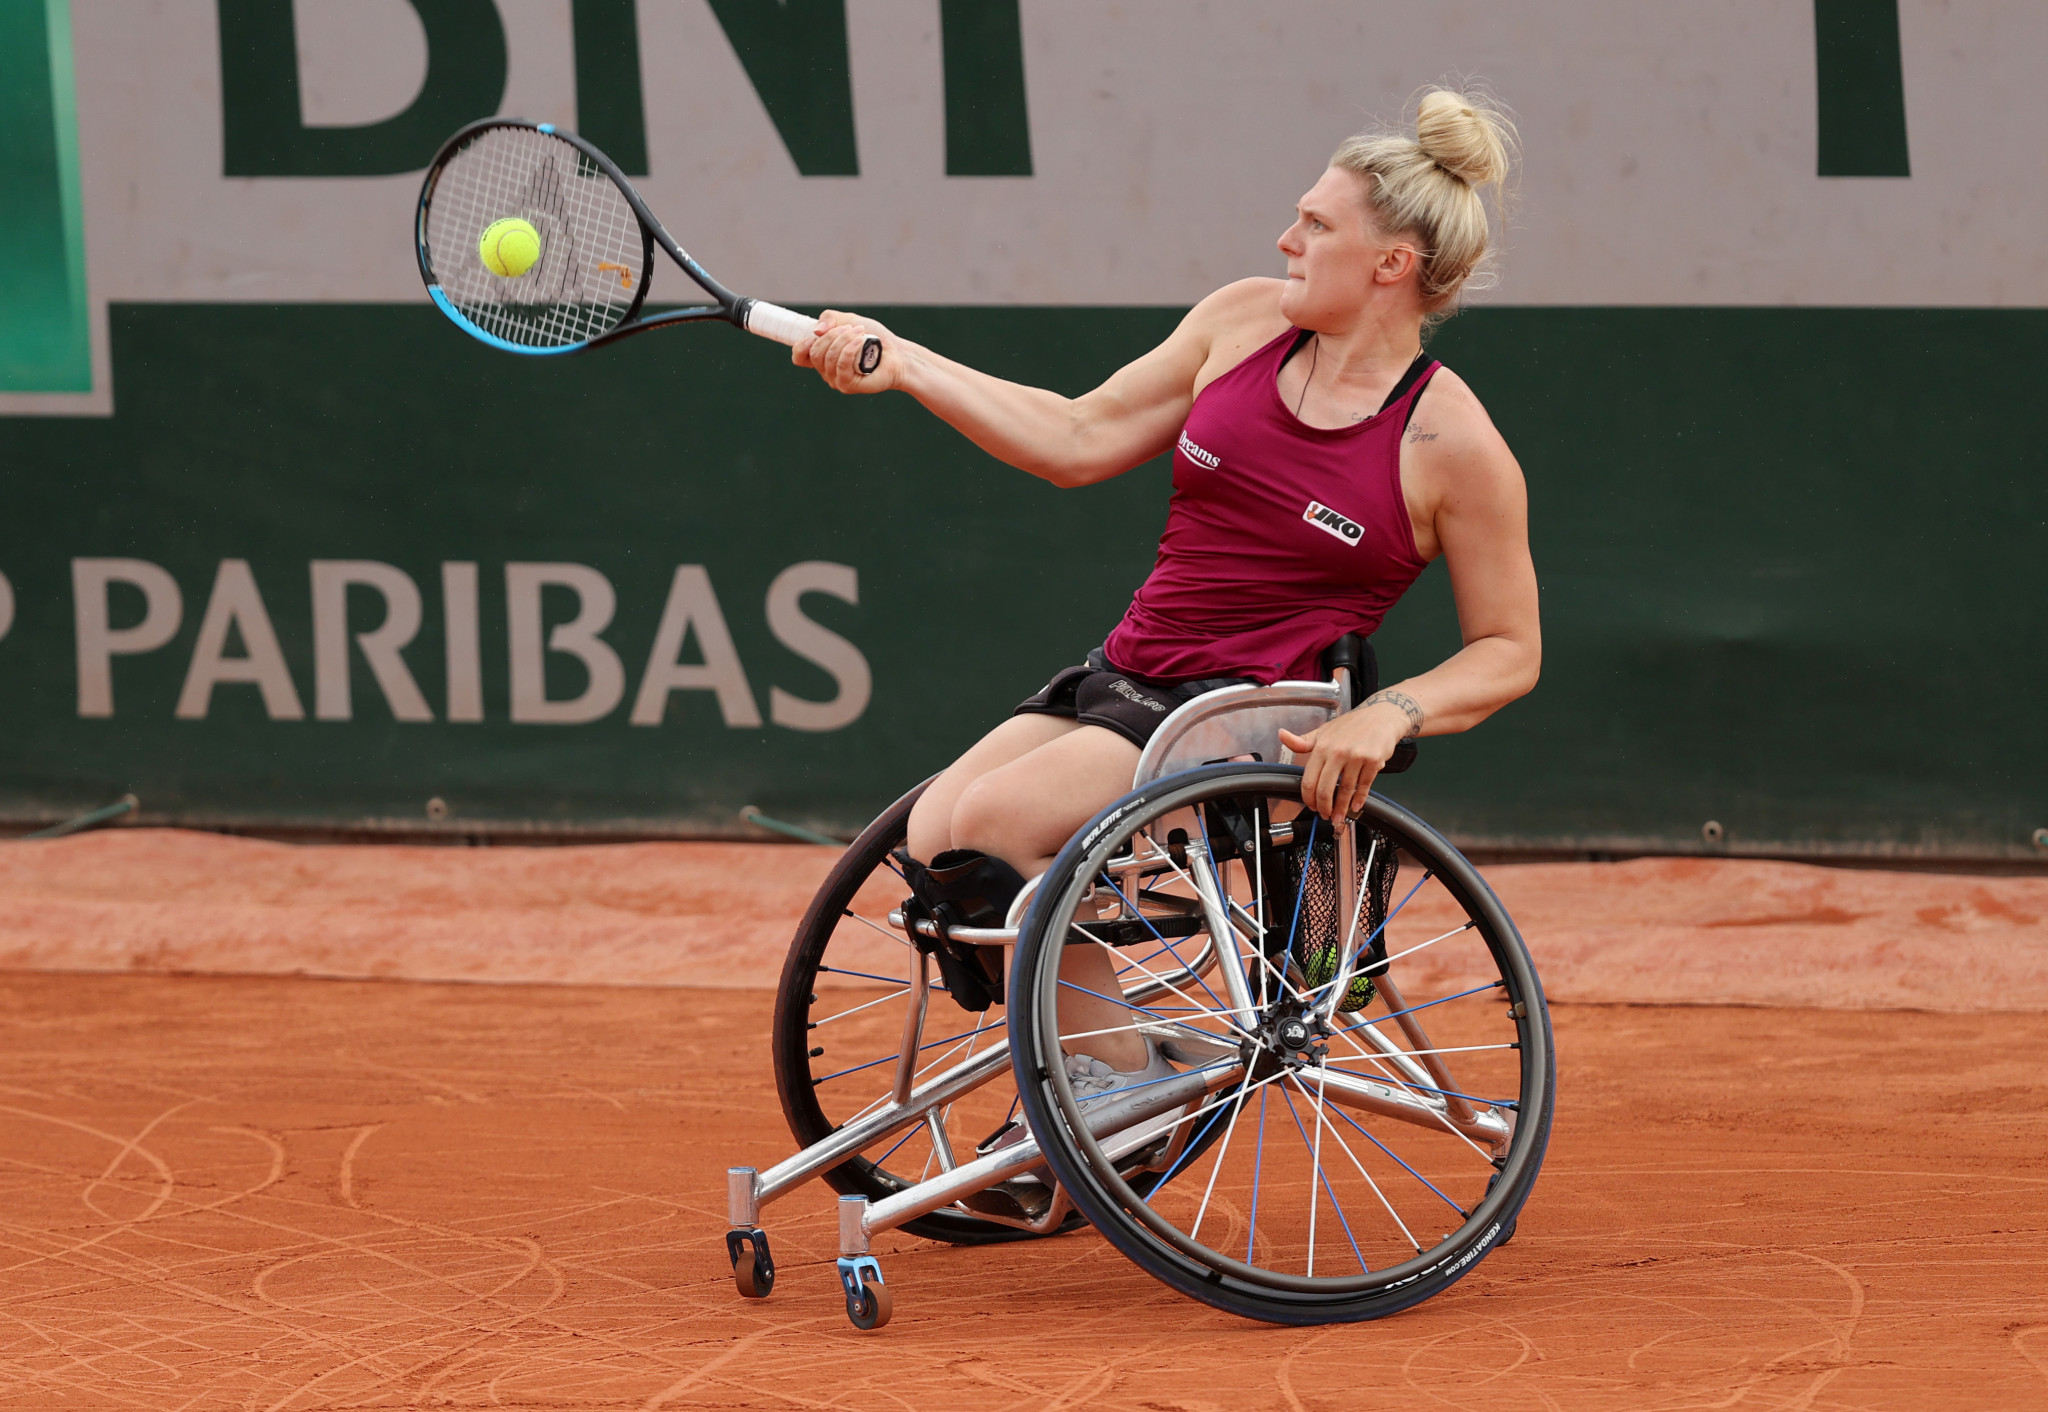 Jordanne Whiley is one of the top women's singles qualifiers ©Getty Images